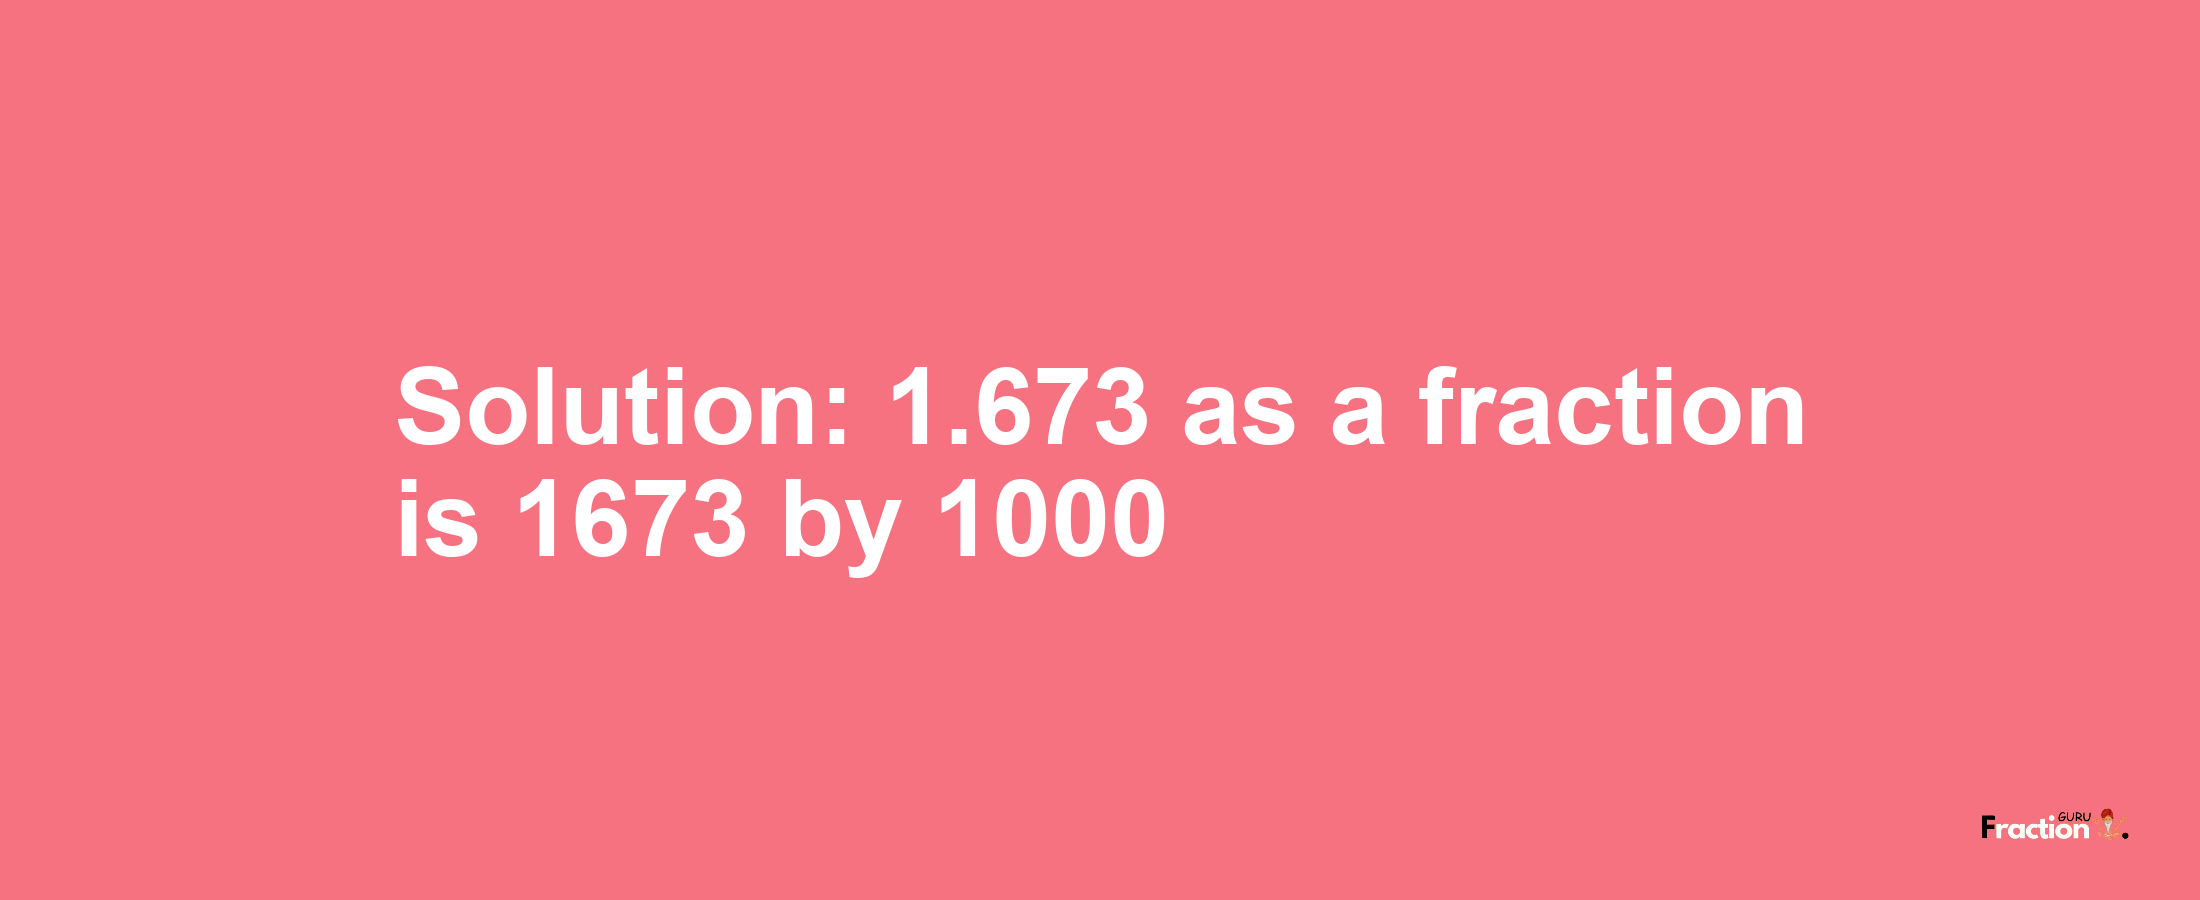 Solution:1.673 as a fraction is 1673/1000